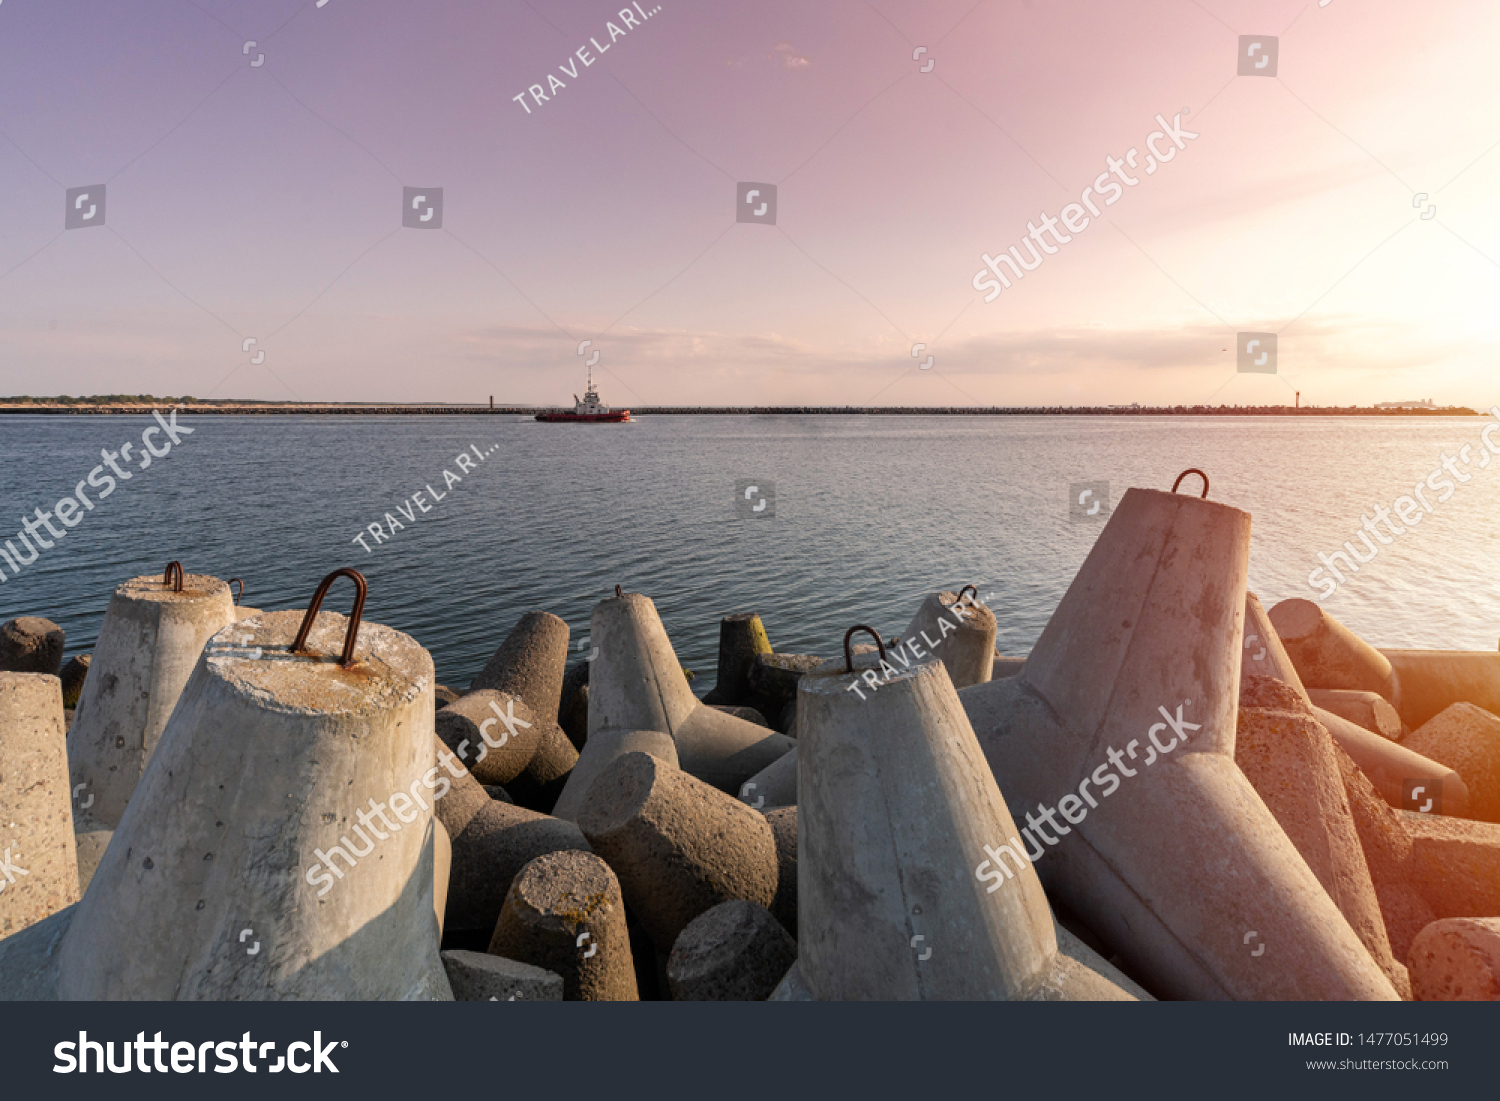 Ship-tugboat goes in high seas to tow cargo ship to port. Beautiful sunset over the pier. Tetrapod breakwaters in harbor. #1477051499